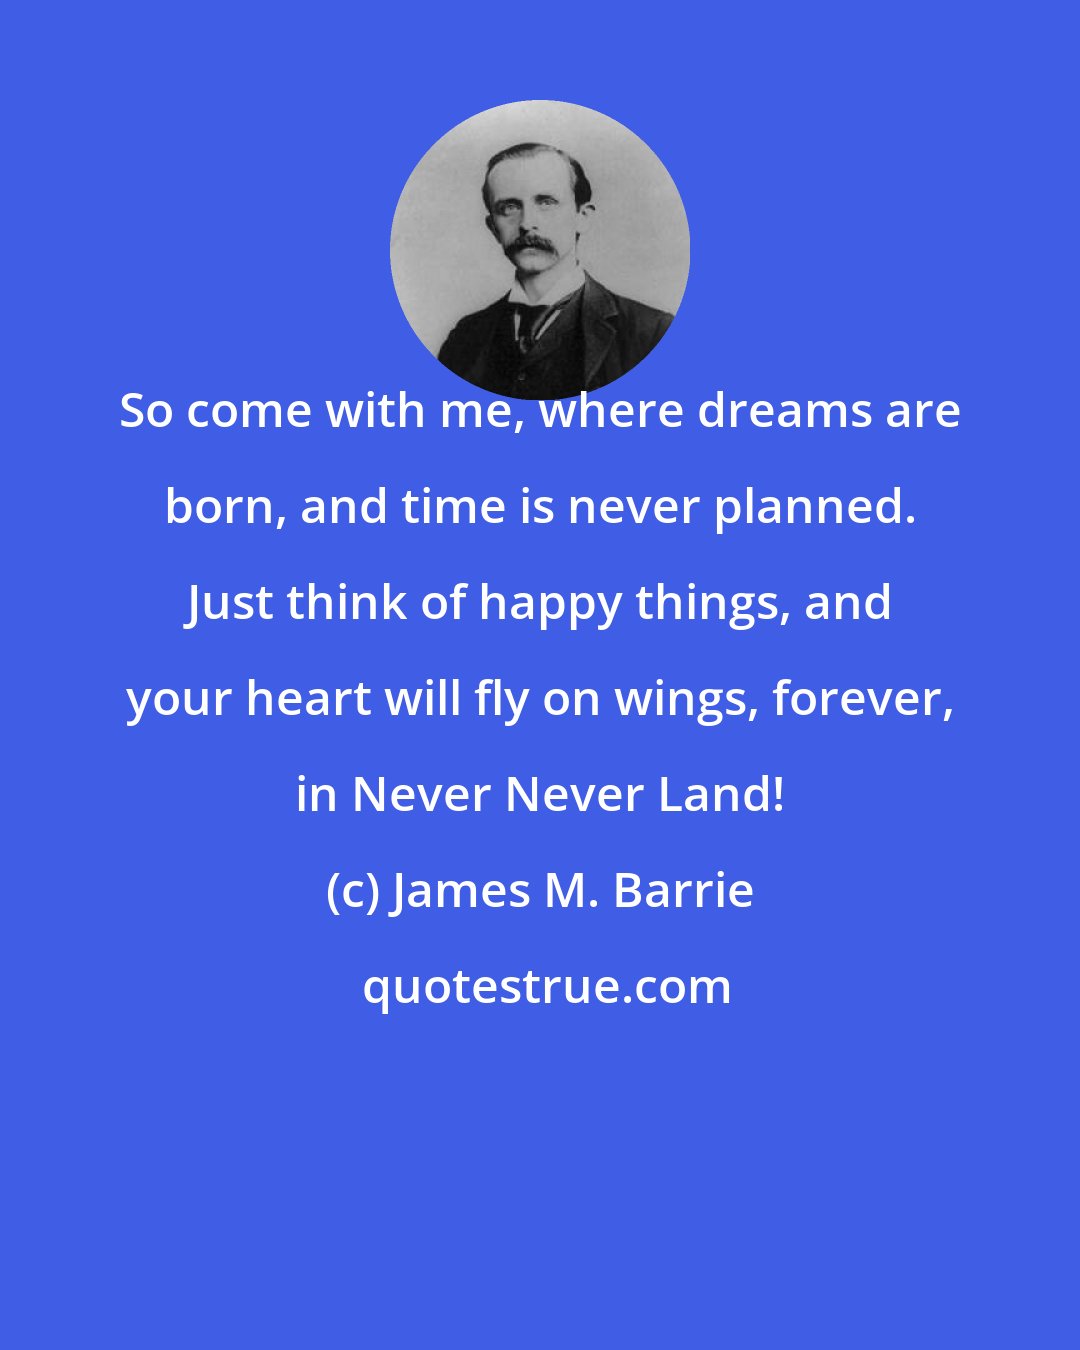 James M. Barrie: So come with me, where dreams are born, and time is never planned. Just think of happy things, and your heart will fly on wings, forever, in Never Never Land!